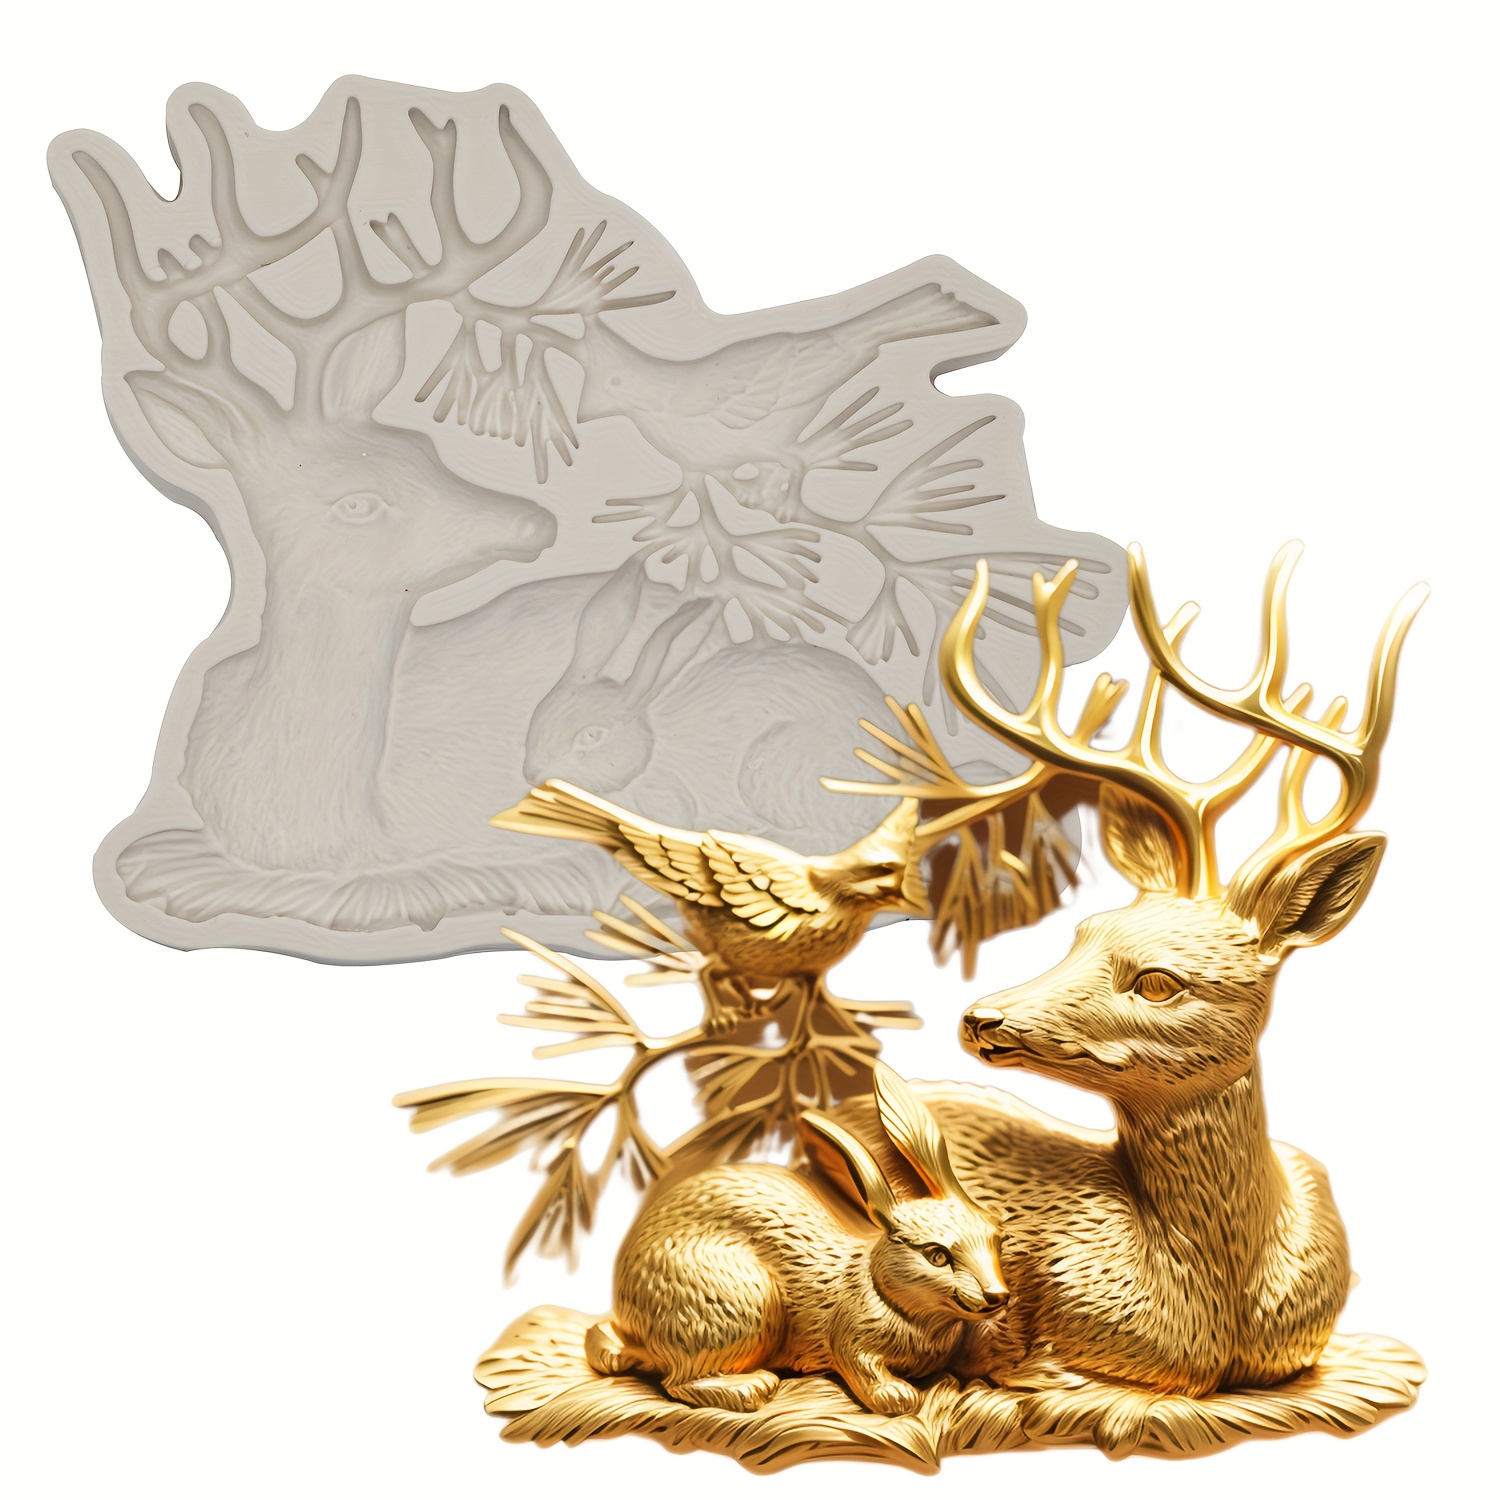 

1pc, Rustic Deer Silicone Mold For Cake Decorating, Fondant Chocolate Candy Gum Paste Mould, Cupcake Baking Tools With Nature-inspired Design